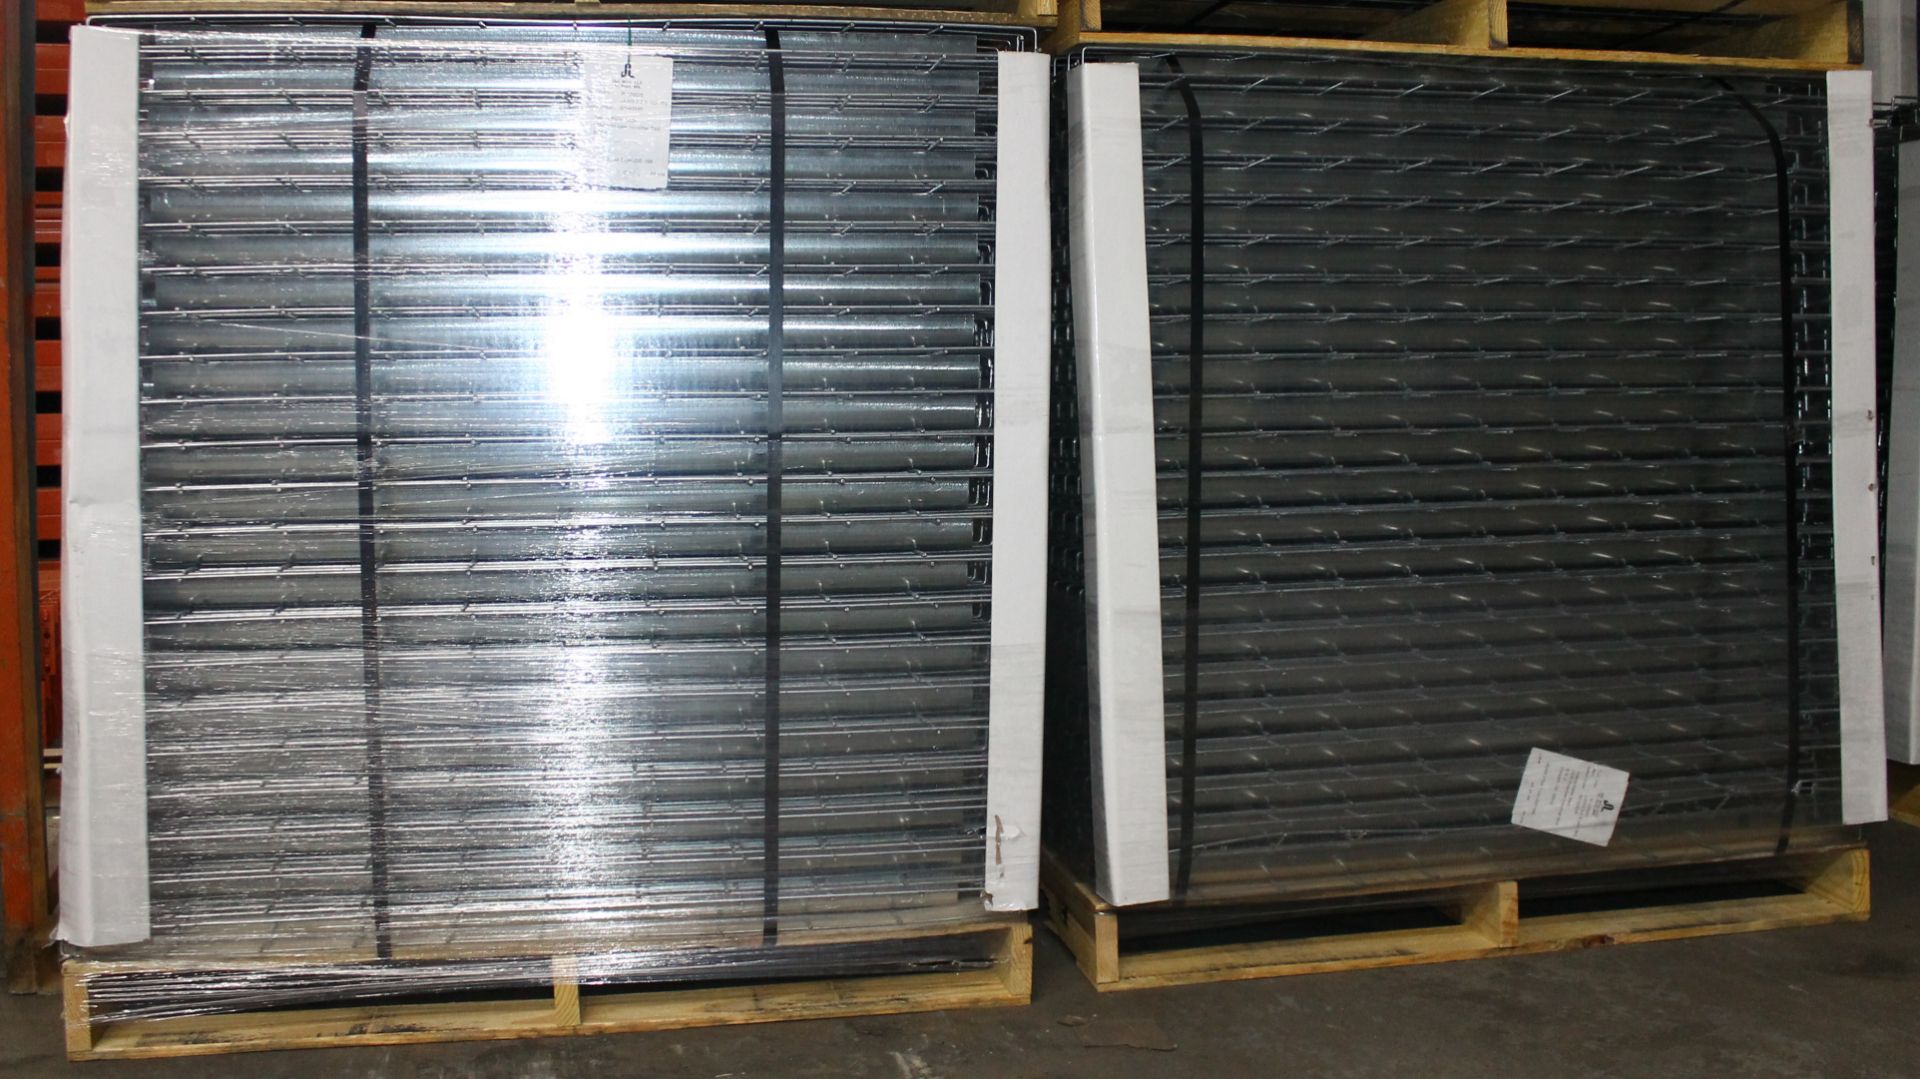 NEW 120 PCS OF STANDARD 42" X 52" WIREDECK - 2250 LBS CAPACITY - Image 2 of 2